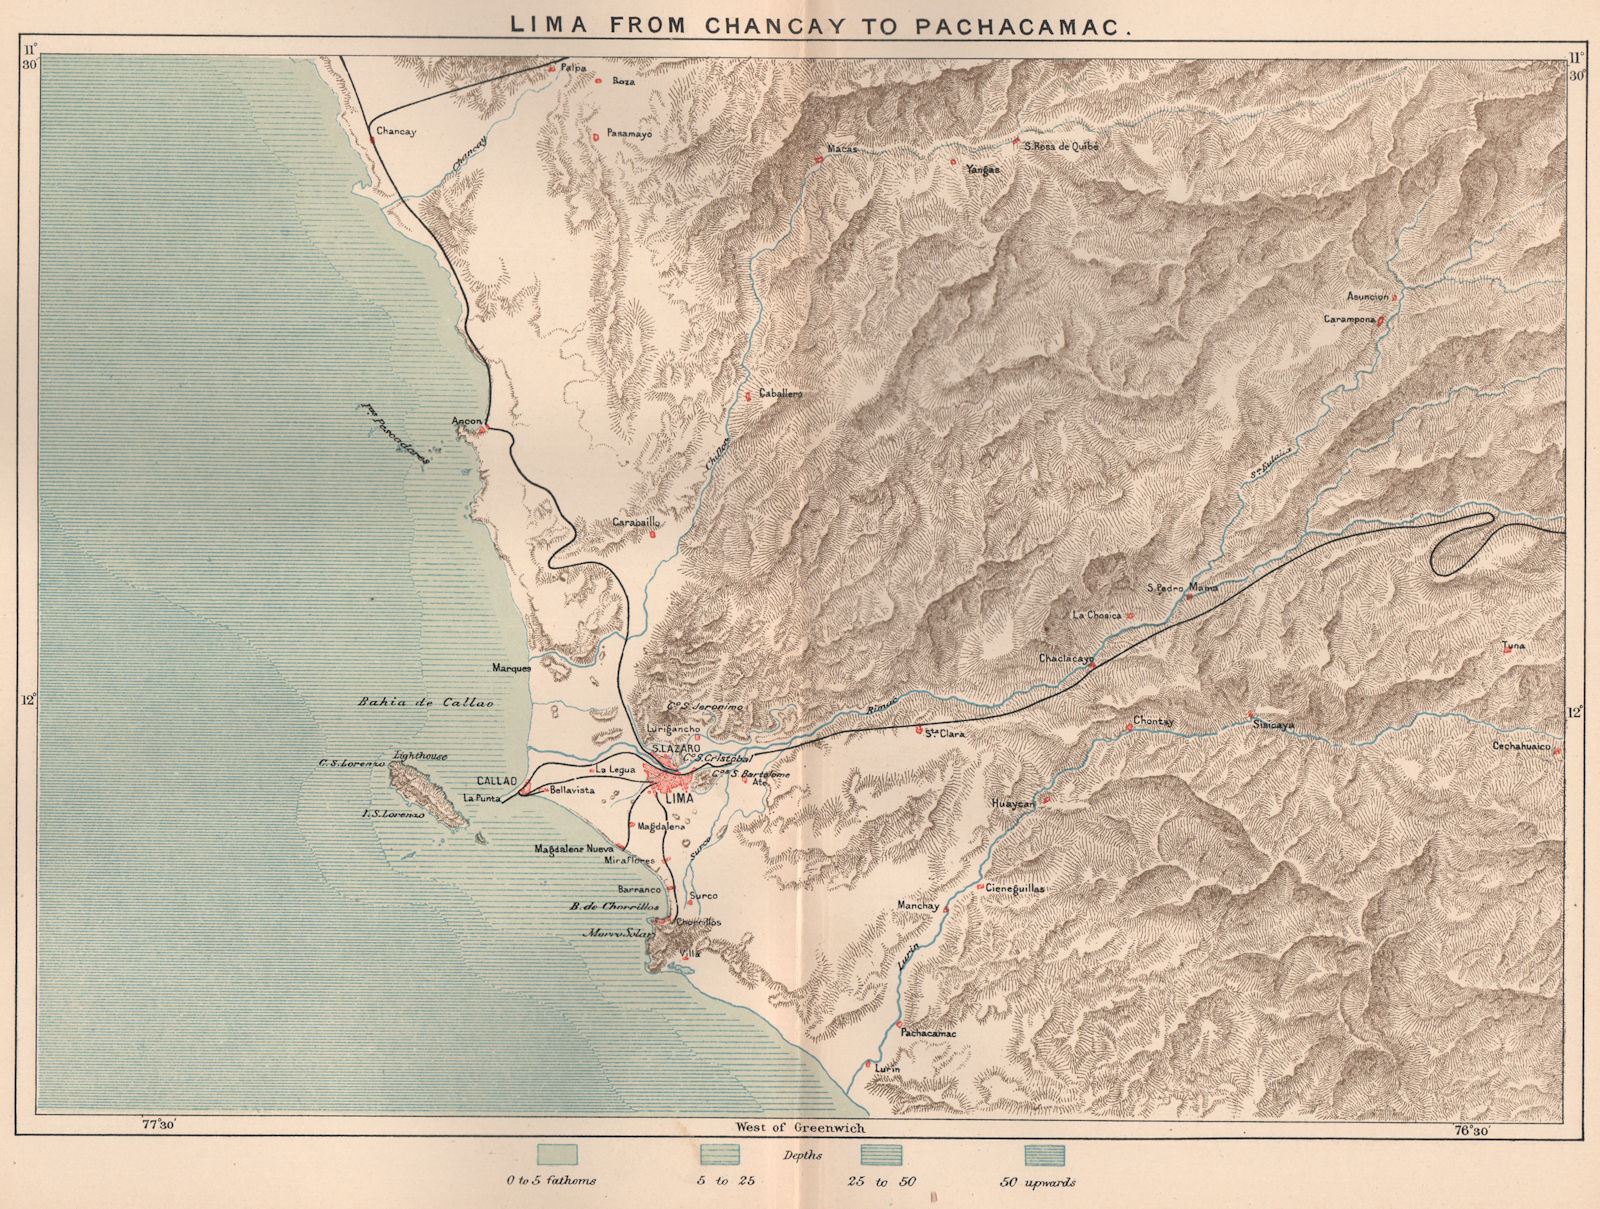 Associate Product Lima, Callao & environs. Chancy to Pachacamac. Peru 1885 old antique map chart